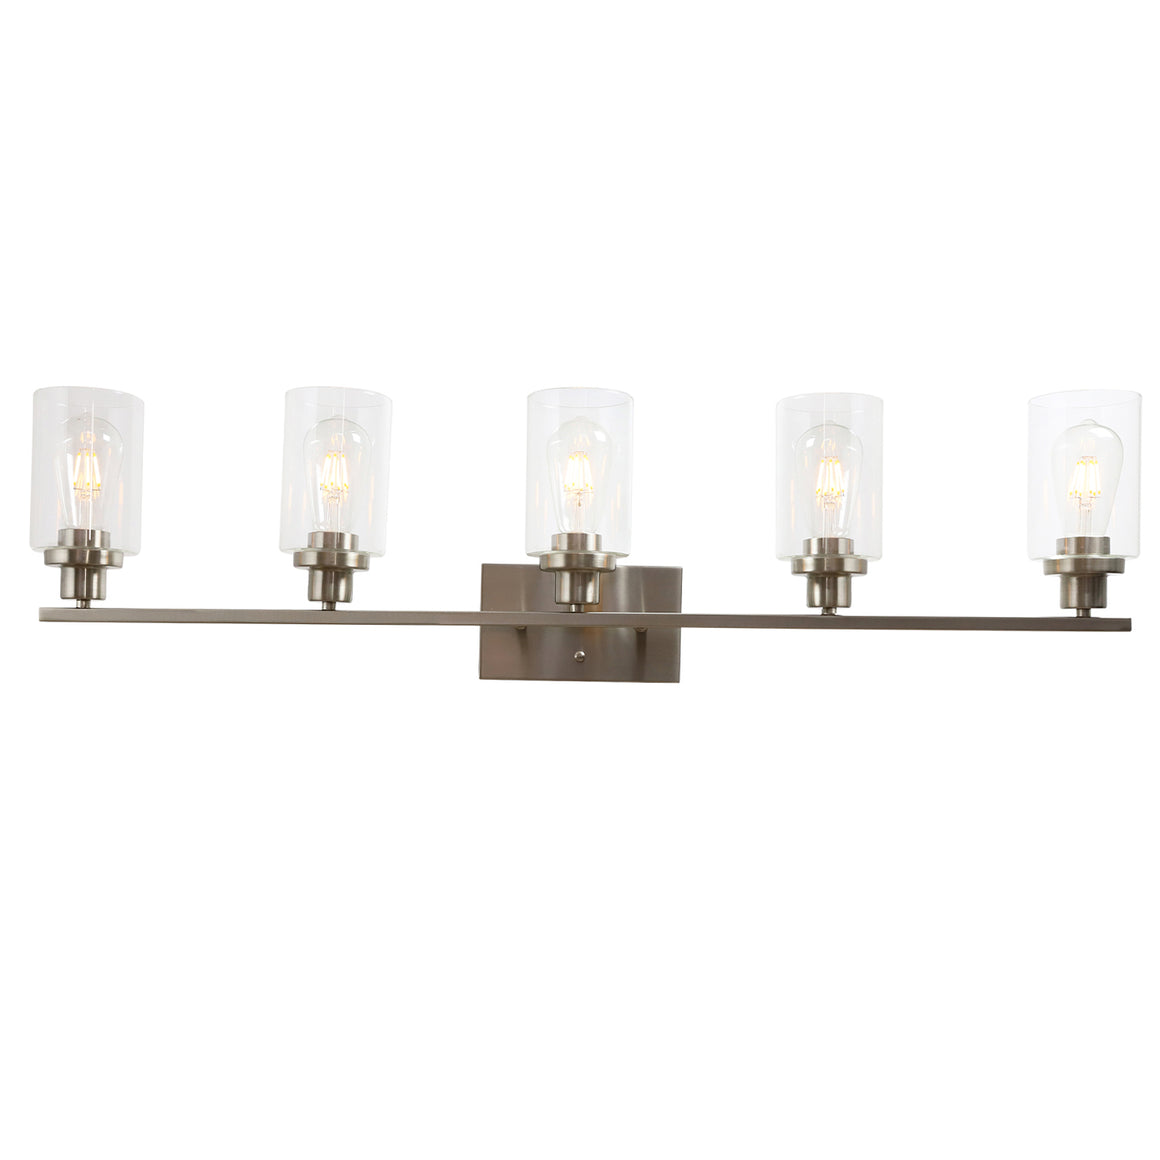 BONLICHT 5-Light Bathroom Vanity Light Brushed Nickel Wall Sconce Modern Light Fixtures Wall Mount with Clear Glass Shade